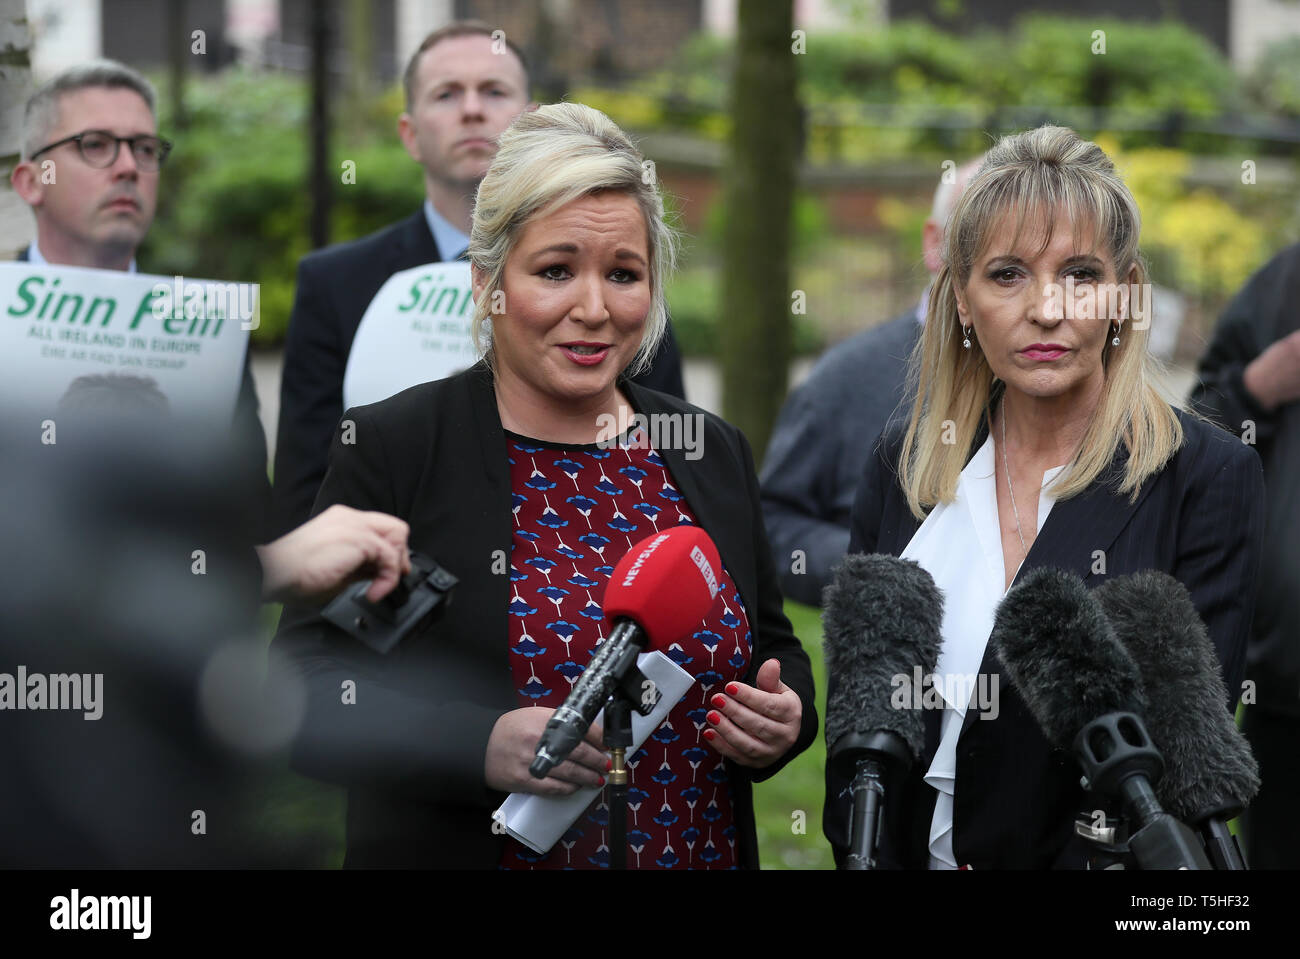 Sinn Fein deputy leader Michelle O'Neill (left) speaks to the media outside the Electoral Office for Northern Ireland after Martina Anderson (right) handed in her nomination papers to run in the European elections. Stock Photo